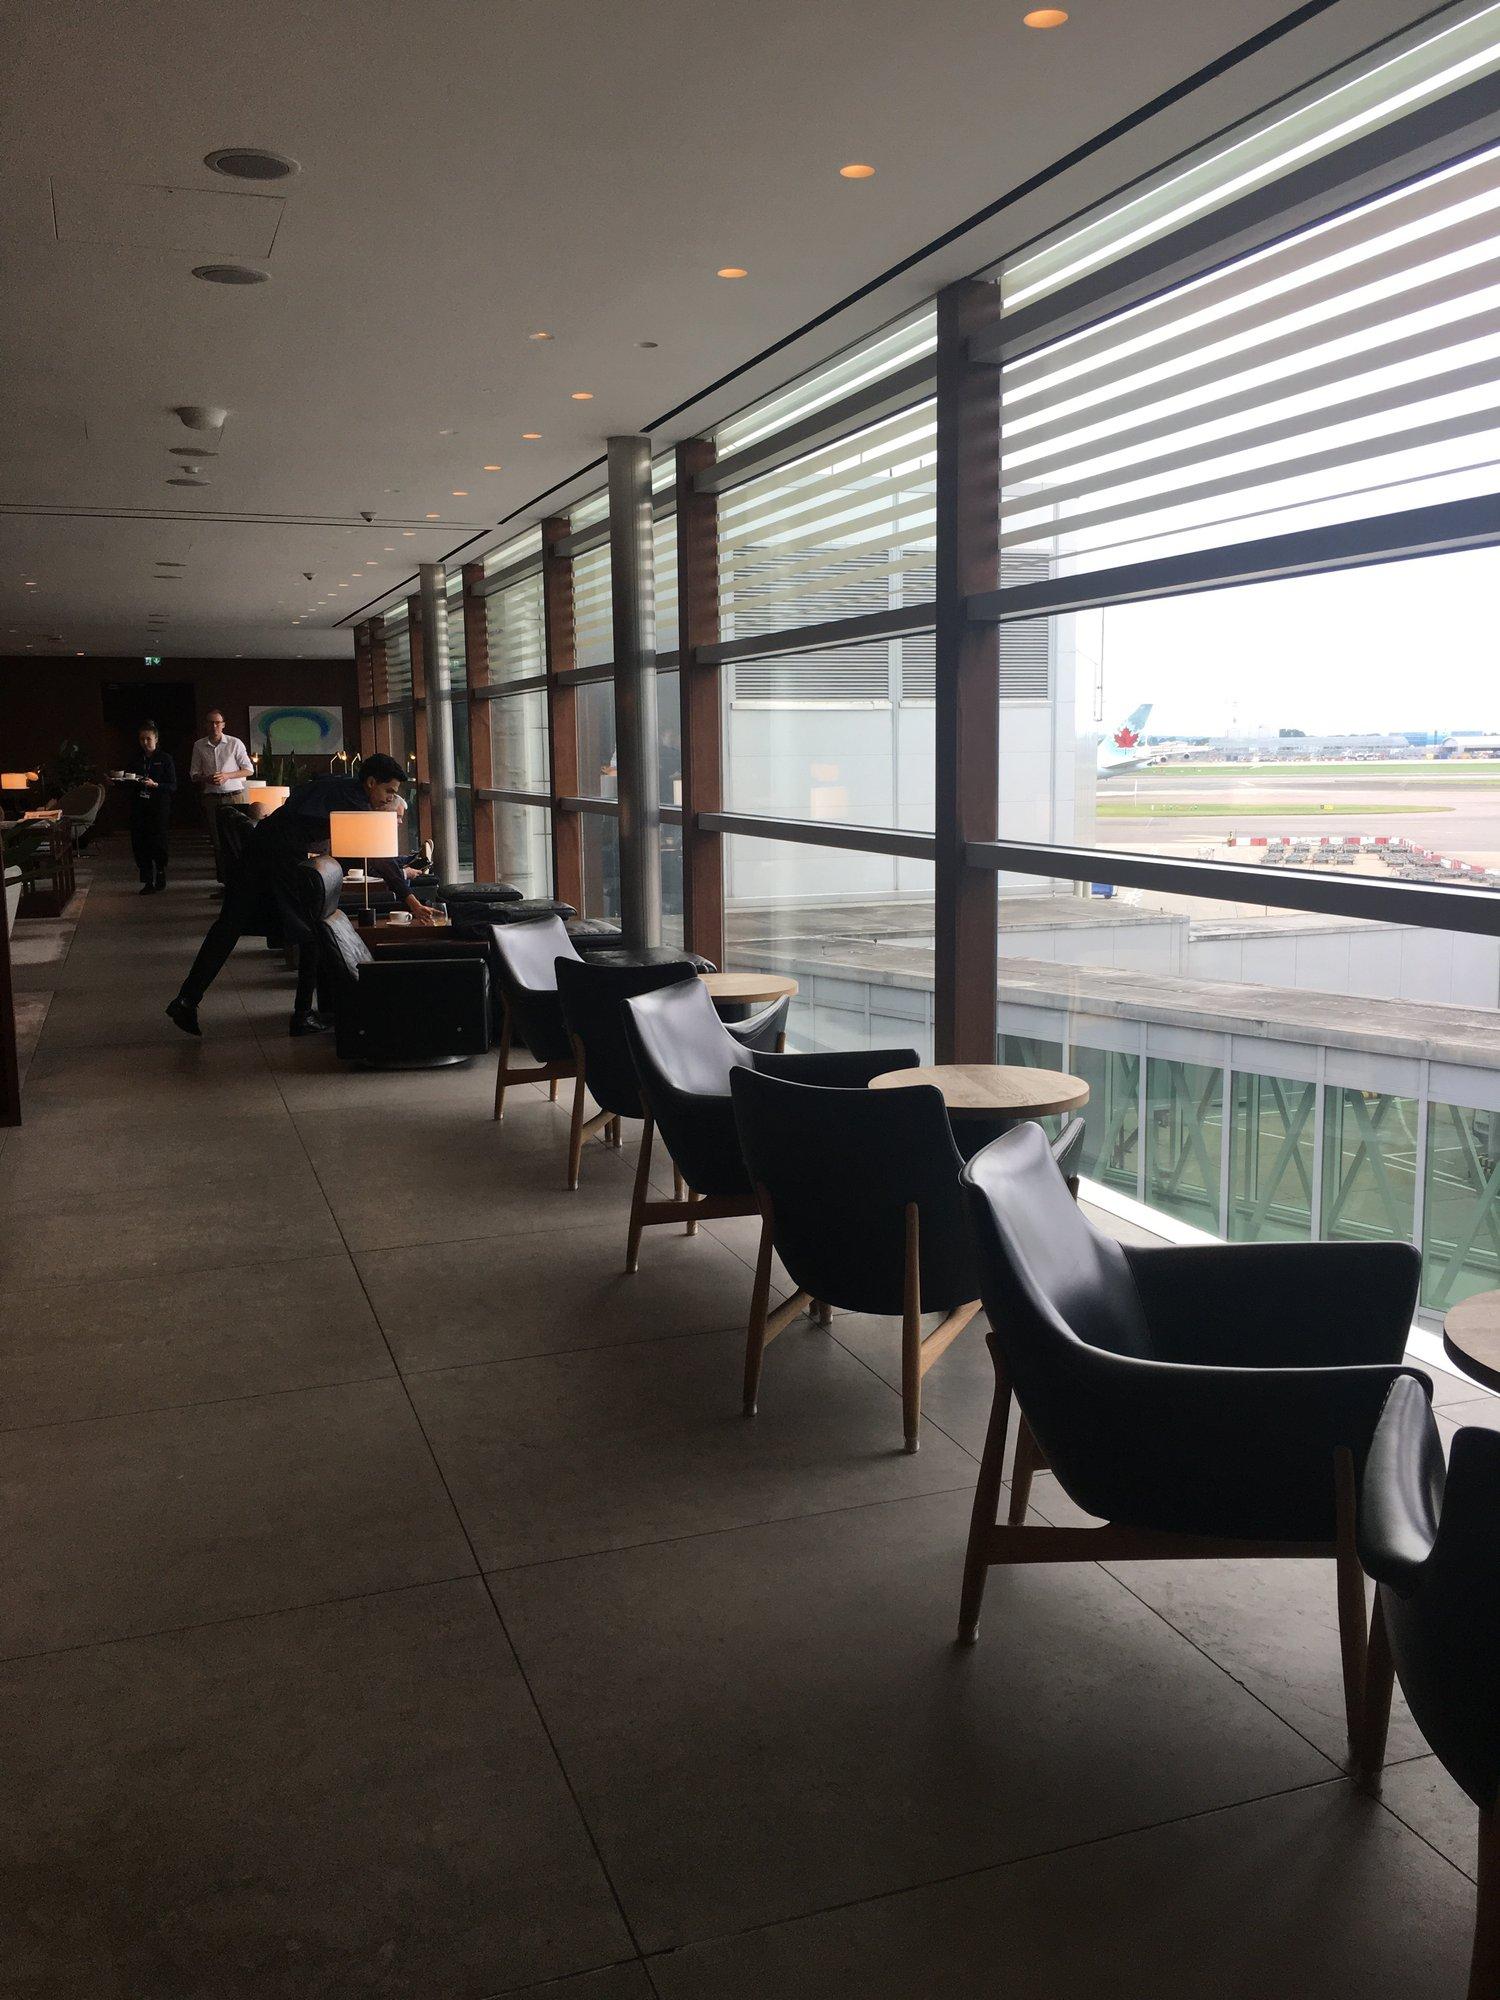 Cathay Pacific Business Class Lounge image 22 of 48